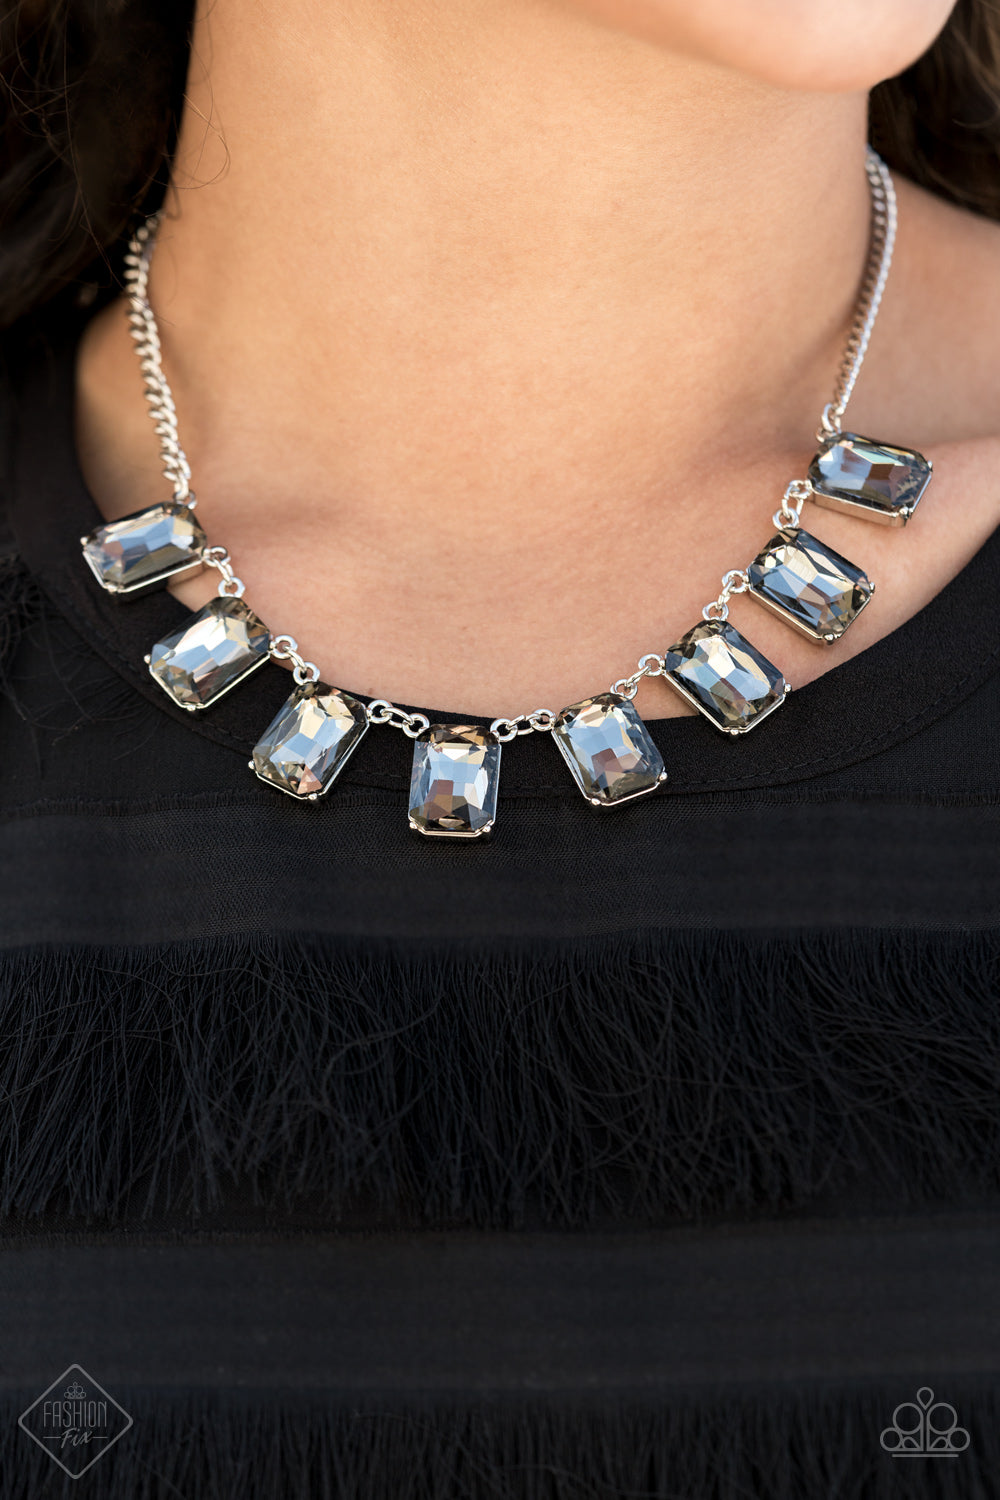 Paparazzi Necklace ~ After Party Access - Silver January 2021 Fashion Fix Necklace